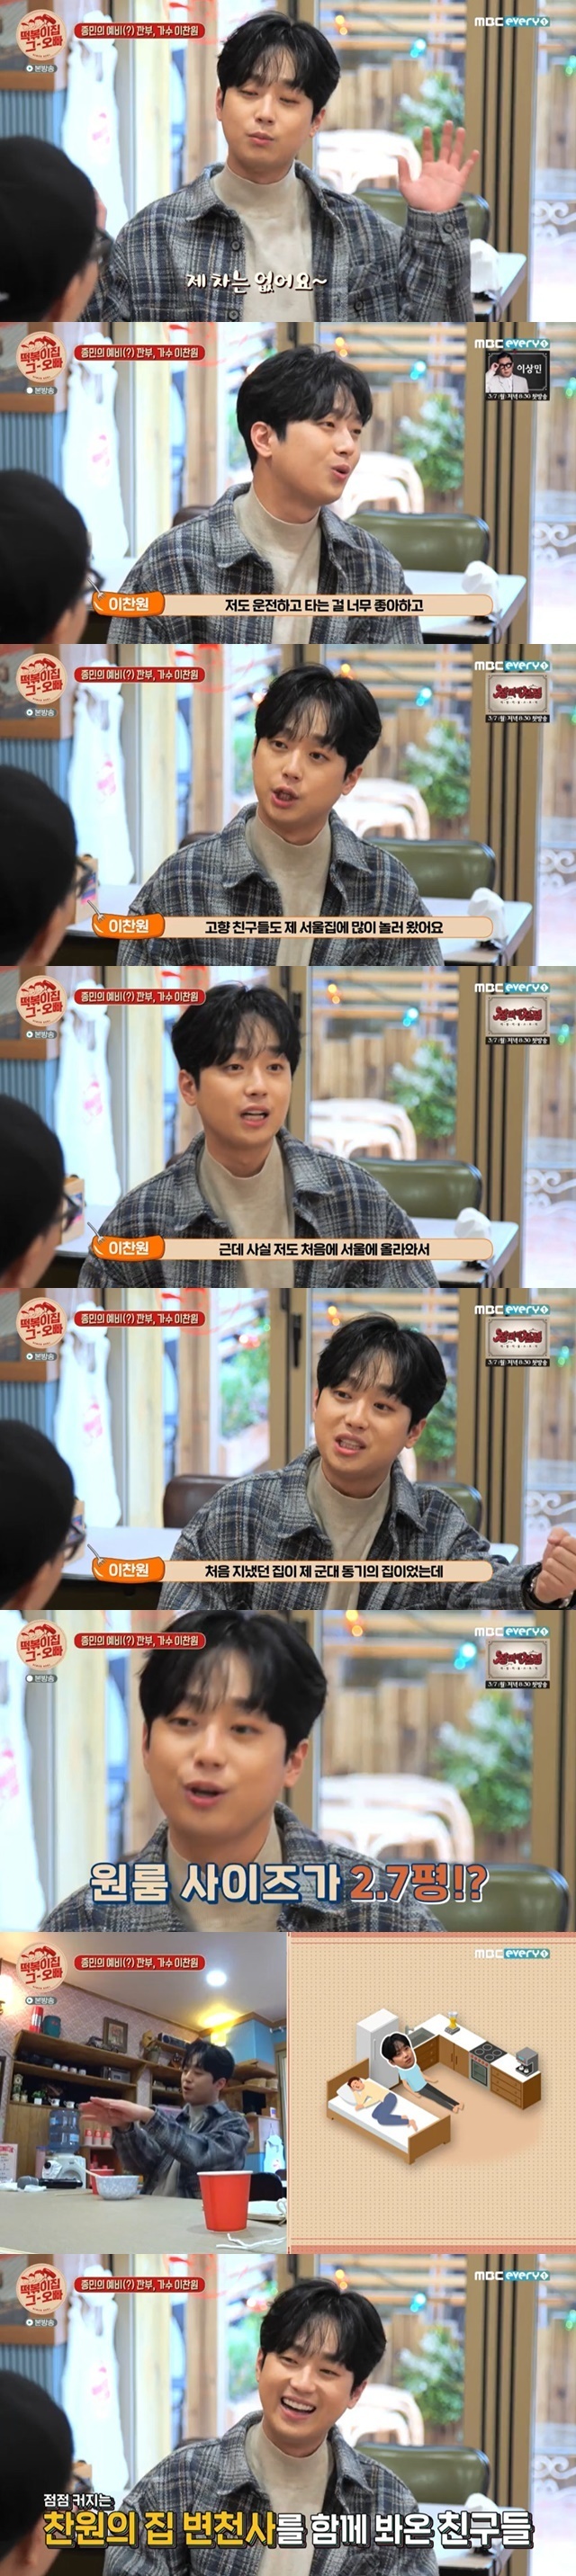 Singer Lee Chan-won said he rented a car without buying it.Singer Lee Chan-won appeared in MBC Everlons Teokbokki house brother, which was broadcast on February 15th.On the same day, Lee Chan-won said, The goal is to receive three entertainment awards within 10 years of debut.If I have a chance later, I would like to try such a program, even if it is not MC. I chose I live alone, Powerful interfering point and Save me Holmes. Lee Chan-won said, I prepared for the real estate agent test.I was not able to take the test when I was going to Mr. Trot. I could have become a certified real estate agent, he added.Lee Chan-won has never been to a nightclub and has accumulated social experience with various part-time jobs since he was 20 years old and admired his parents for not receiving allowance.Lee Chan-won went to Seoul with about 7 million won after paying for his school expenses, spending his living expenses, and going to the Mr. Trot.I spent all my money in three months because I had to pay for my clothes. I didnt spend it. I had to rent the practice room.Ginto Bag Before James Stewart, I called my mom and asked her to borrow two million won. She was surprised.She said she was worried about what she was doing. She was successful with Mr. Trot and would pay ten times.I went to the Jinto exhaust broadcast and the reaction came out after James Stewart, he said.My father was so open, Lee said, and my uncle prepared the actor and my father was good at singing. At that time, he had too much money to give up his dream.He wanted to live a normal life. He was a fan. He chose the song Zinto Baggi.Because he was a man, he said, he might have been mad. Since then, he has selected all the contests. He also expressed his gratitude for his father.Lee Chan-won, who has been on the road since Mr. Trot, has not bought a car. Lee Chan-won said, I like to meet people. I like drives. No cars.I always rent it as a rental, he said. I like driving so much, but I am refraining from buying it at a young age.Kim Jong-min said, If you work like this at this age, you will pull a loan and buy a sports car.In fact, I first came up to Seoul and went into the military motivator house, where the One Room was 2.7 pyeong, the bed was down and the kitchen gas stove was over.Friend sleeps in bed, and I sleep on the floor.I live in the 2.7-pyeong One Room in Shindorim and the house grows a little, so the close friends know all the changes. When Ji Suk-jin said, Im famous, and I can say that the Friends have changed without my mind, Lee said, The time zone does not match the workers.When I watch my cell phone after the shooting of Senesi at dawn, I have a lot of absences. If I have to call the next day, I can not get Ashley Cole back every time.If the shooting takes three days in a row, I cant back Ashley Cole, he said.